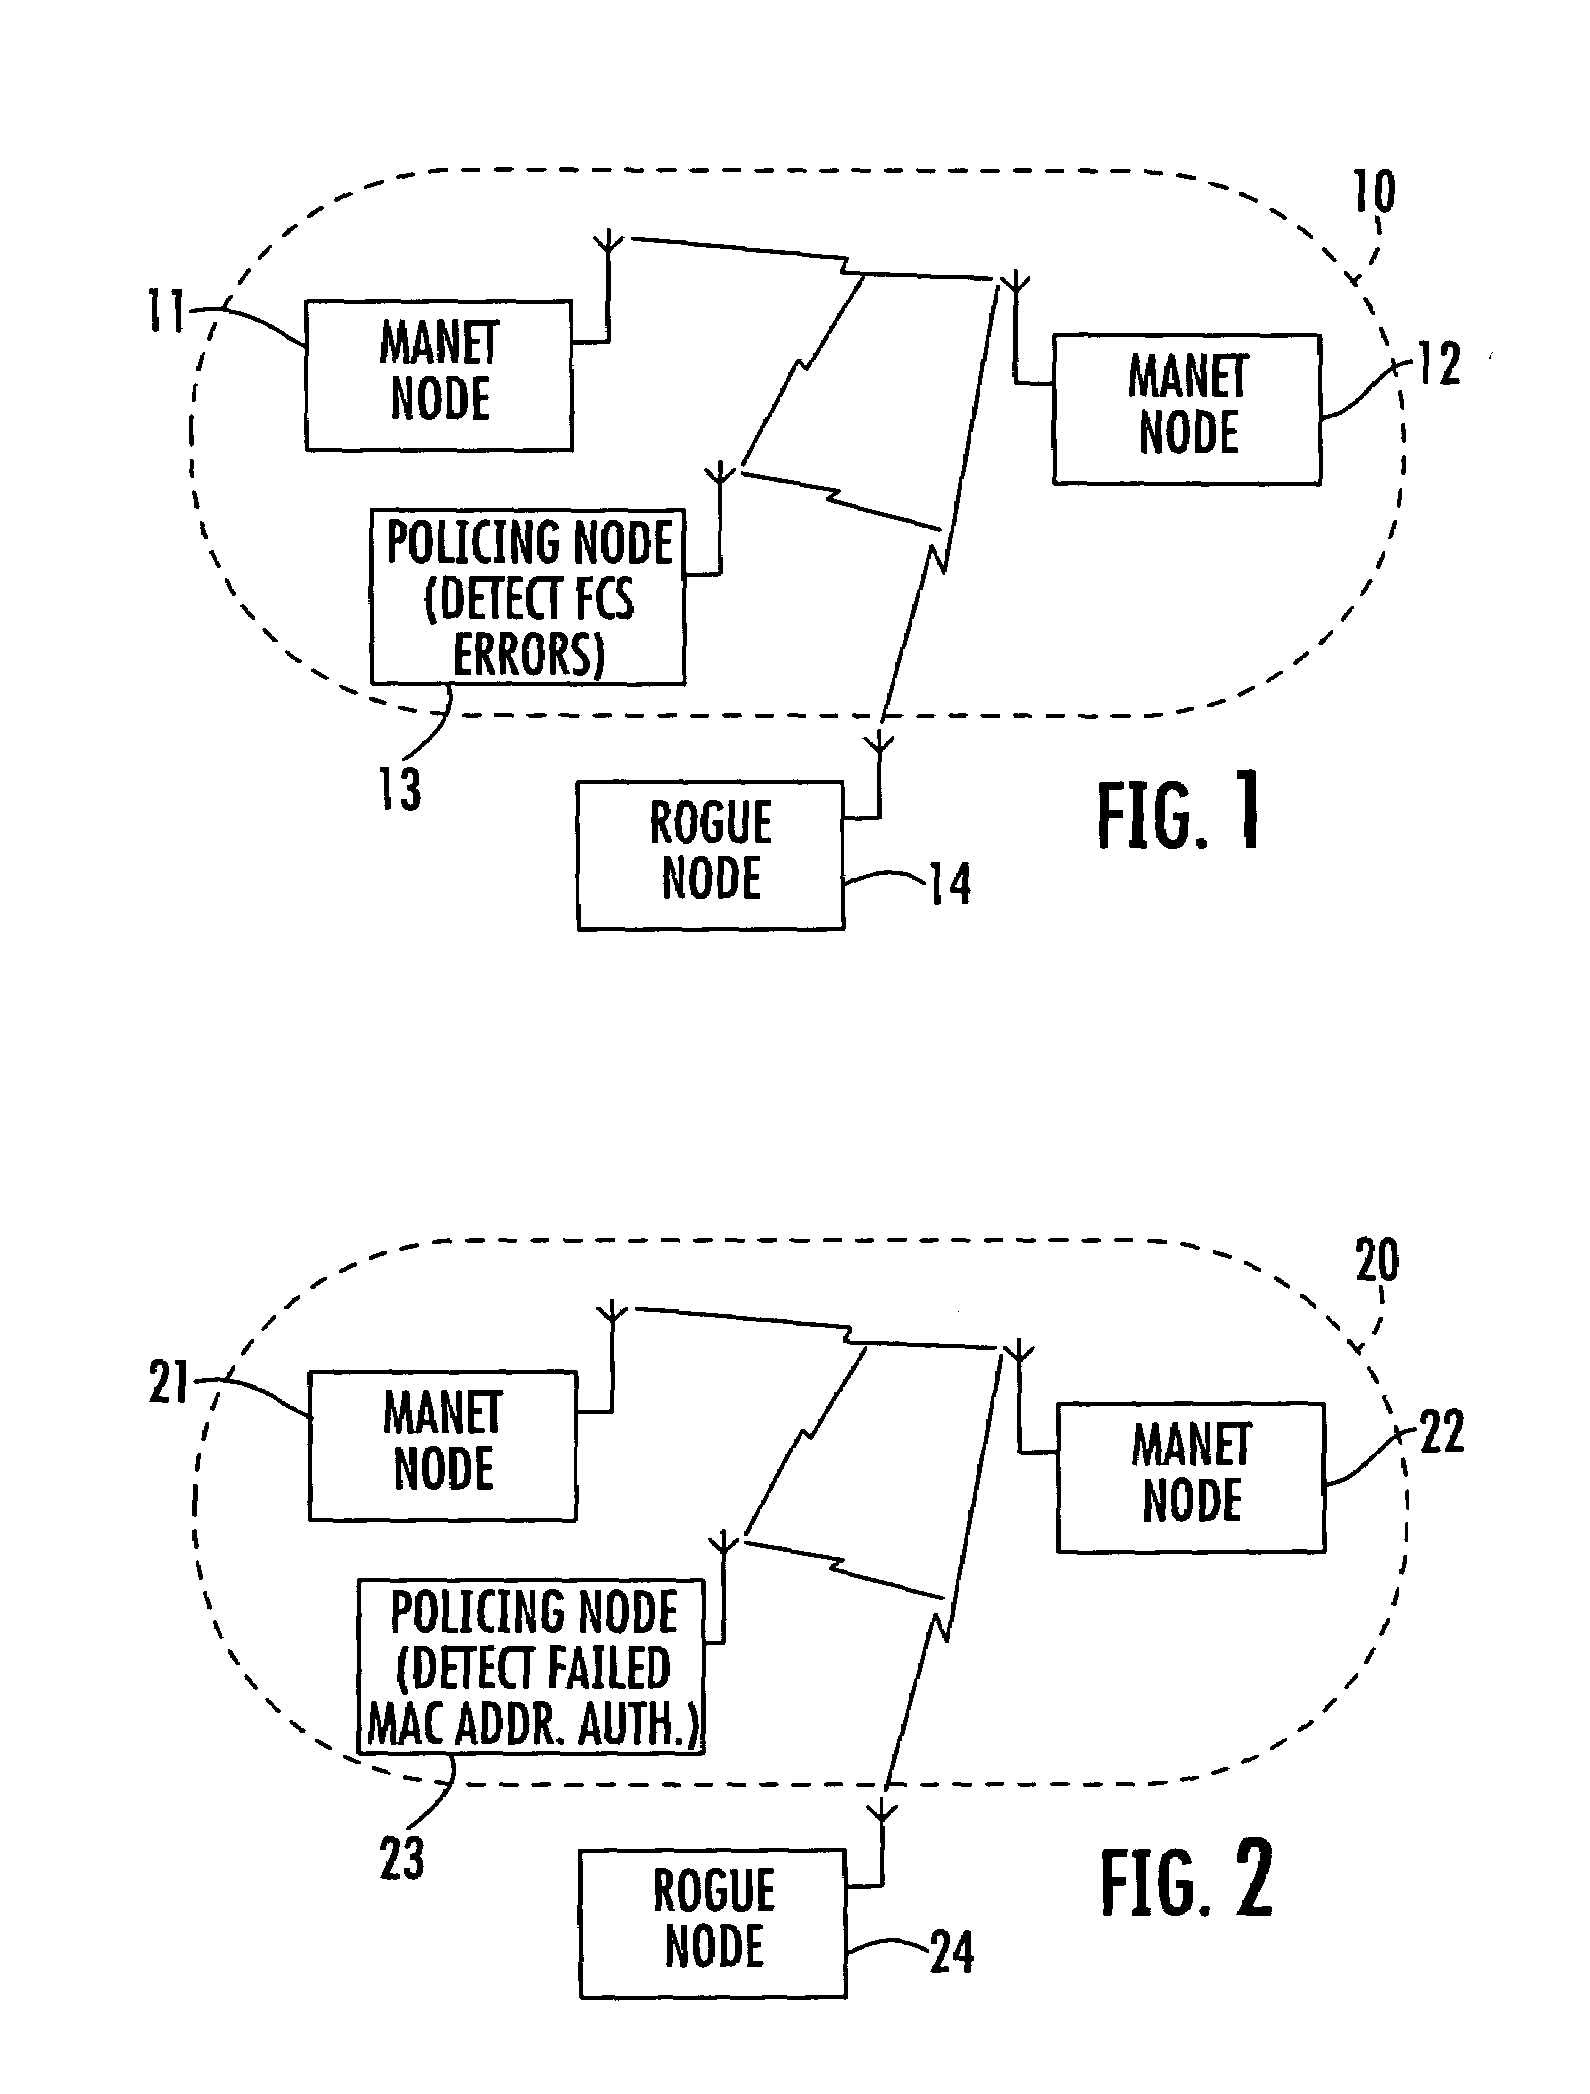 Mobile ad-hoc network with intrusion detection features and related methods